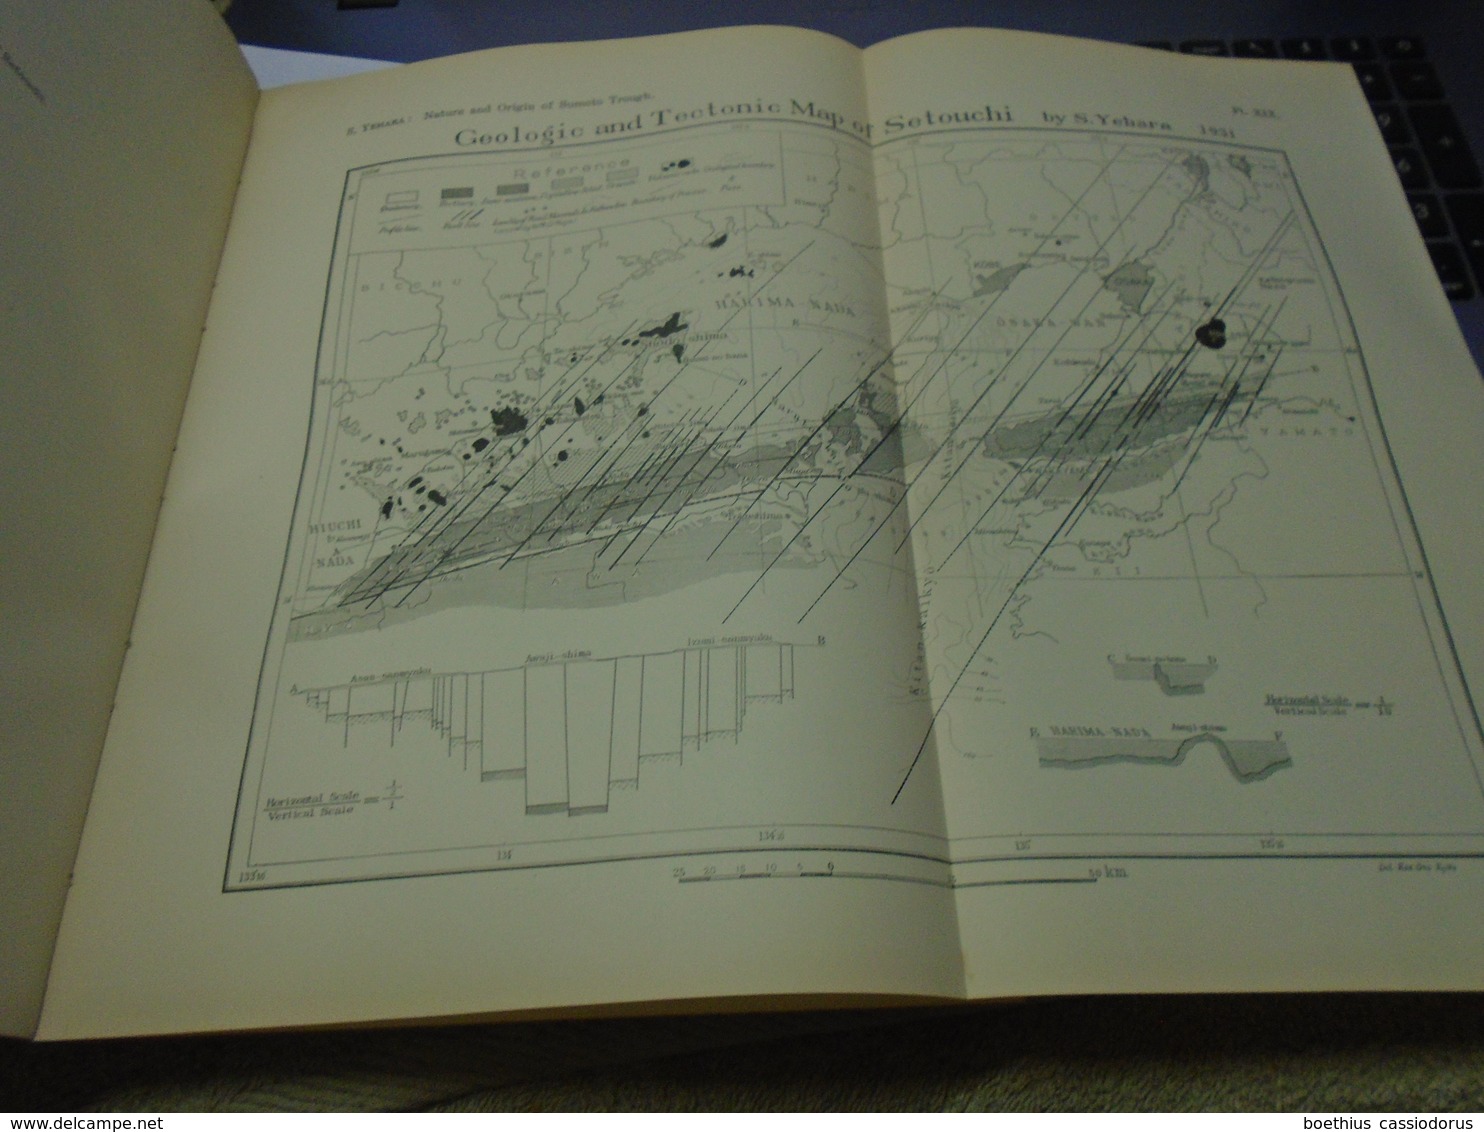 JAPANESE JOURNAL OF GEOLOGY AND GEOGRAPHY Transactions And Abstracts Vol. IX  Nos. 3 And 4 TOKYO March,1932 - Geología